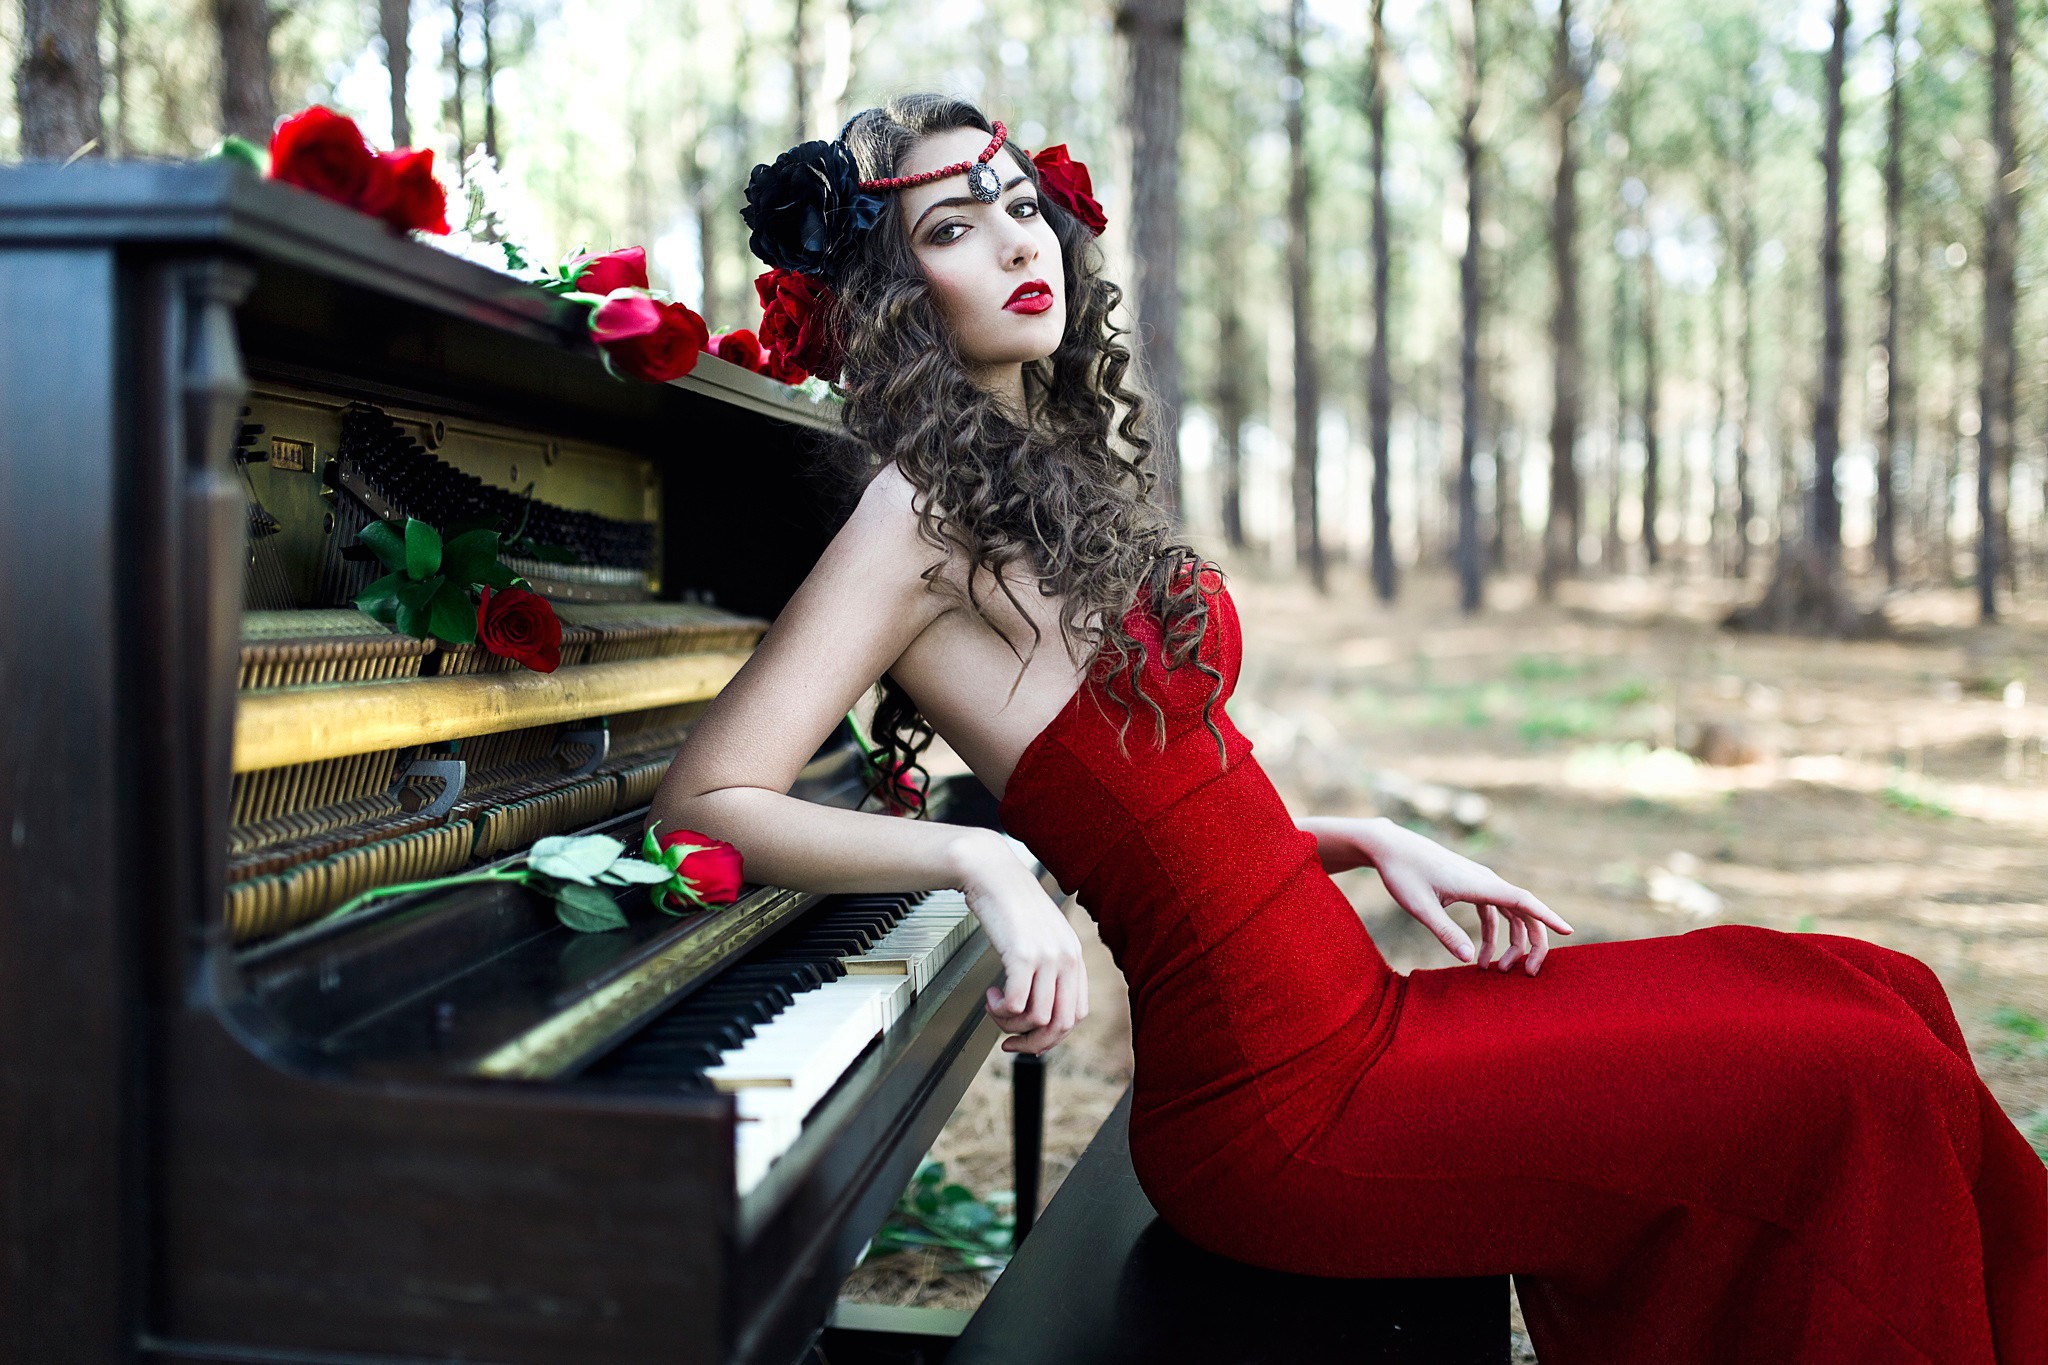 The girl in the red dress sitting at the piano